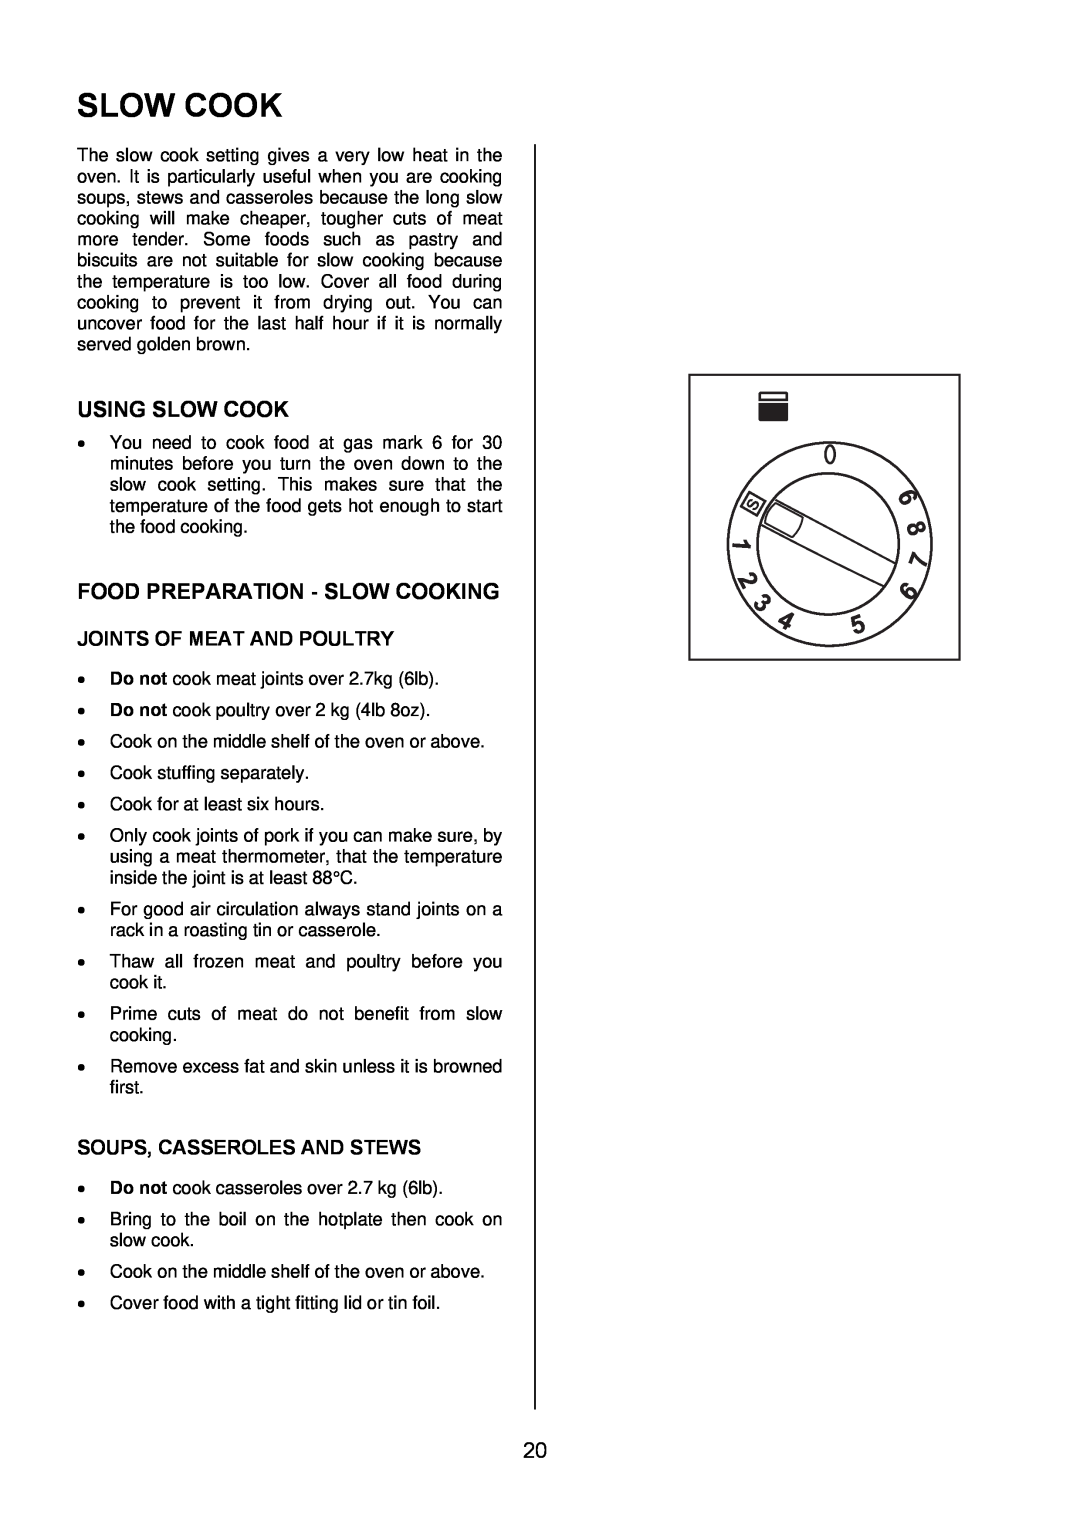 Electrolux EKG6049 user manual Using Slow Cook, Food Preparation - Slow Cooking, Joints Of Meat And Poultry 